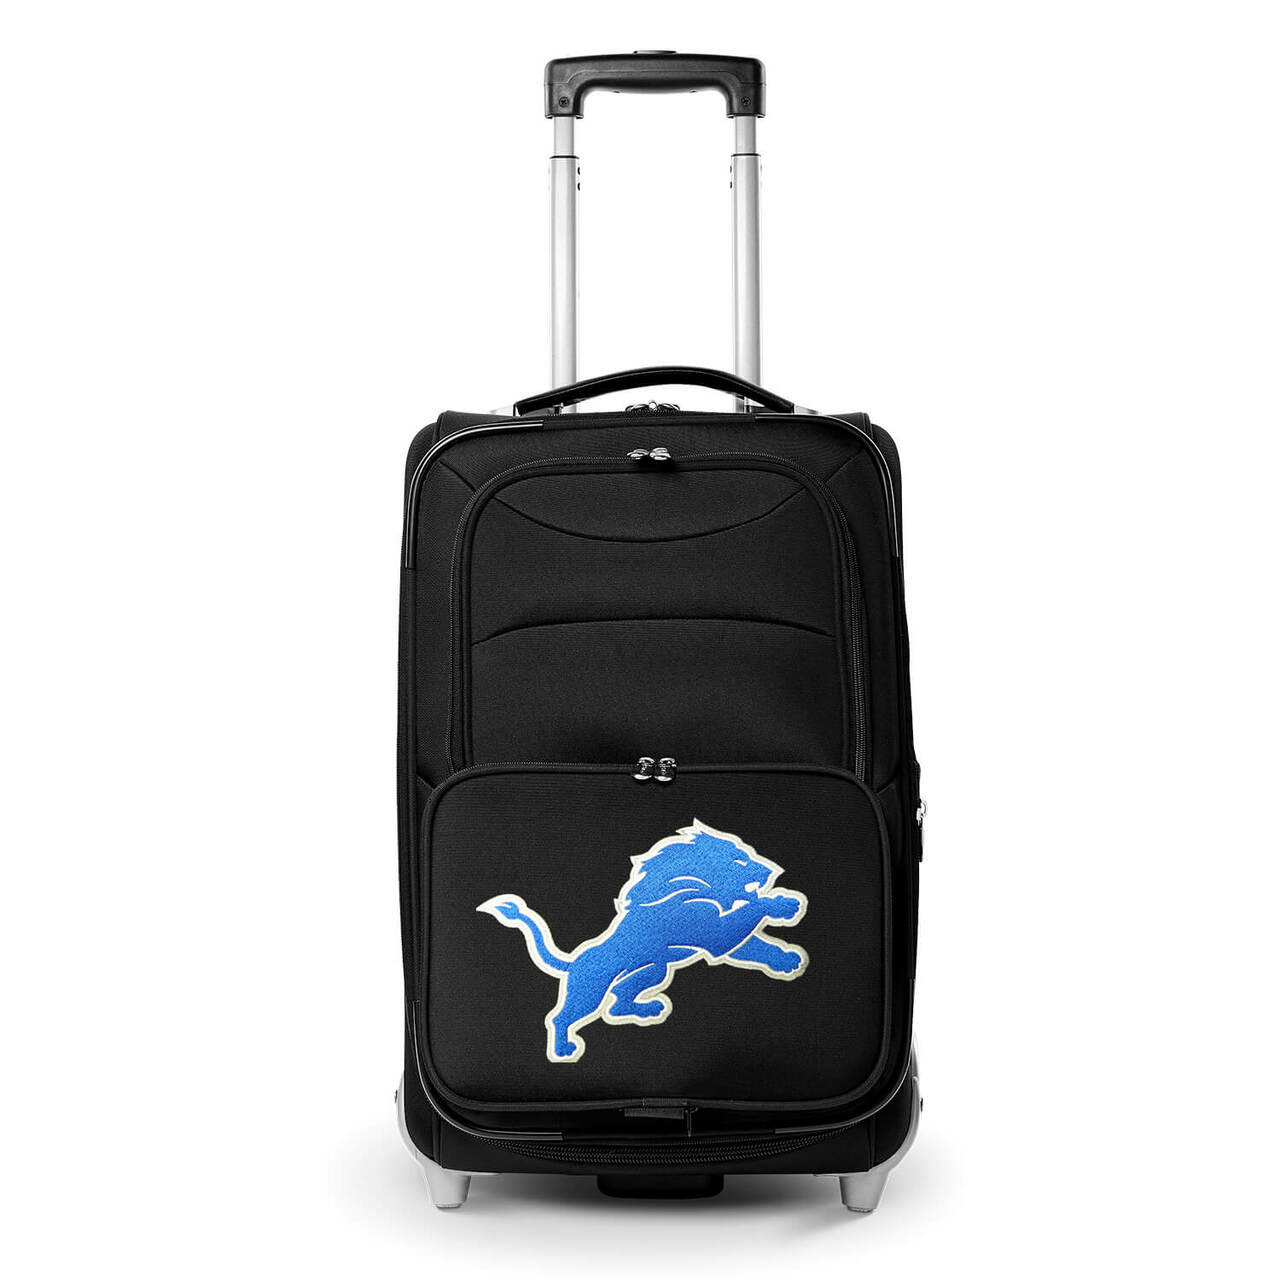 Lions Carry On Luggage | Detroit Lions Rolling Carry On Luggage